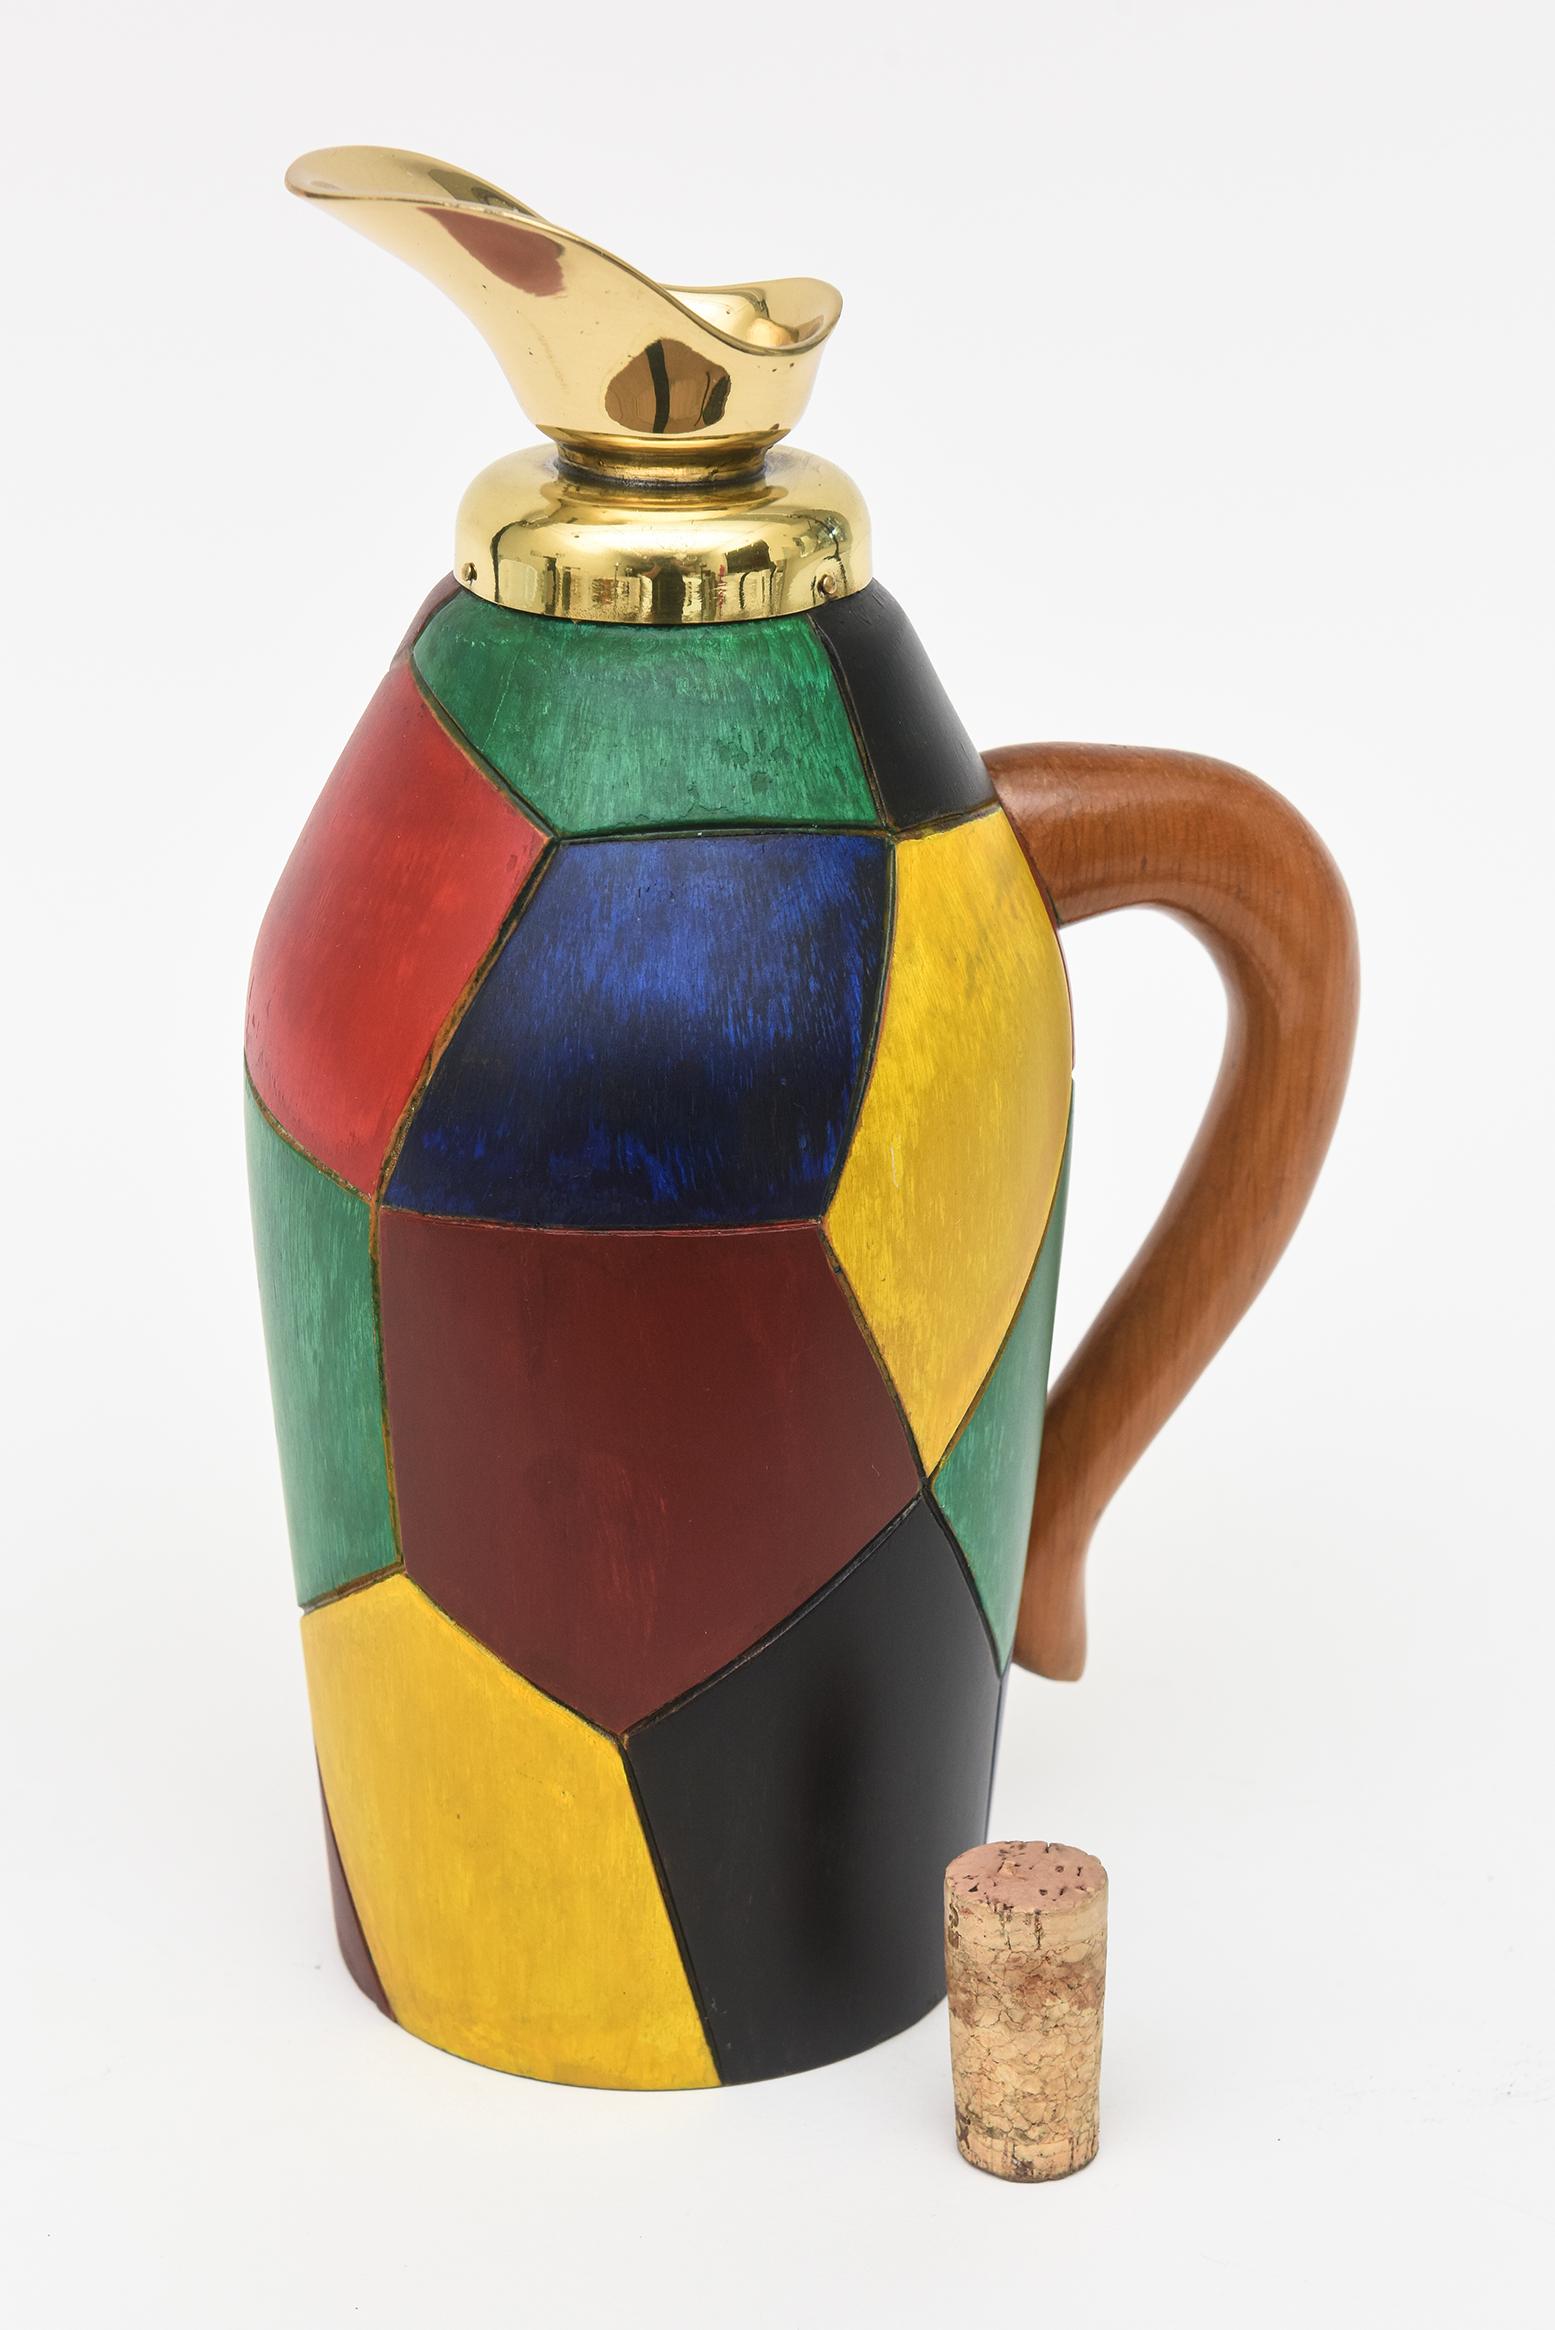 This fabulous mid century modern Italian Aldo Tura style jug has the original color painted wood forms on the front. The colors range from navy blue, mustard yellow, emerald green, burgundy and red. The handle is the original colored wood. The brass